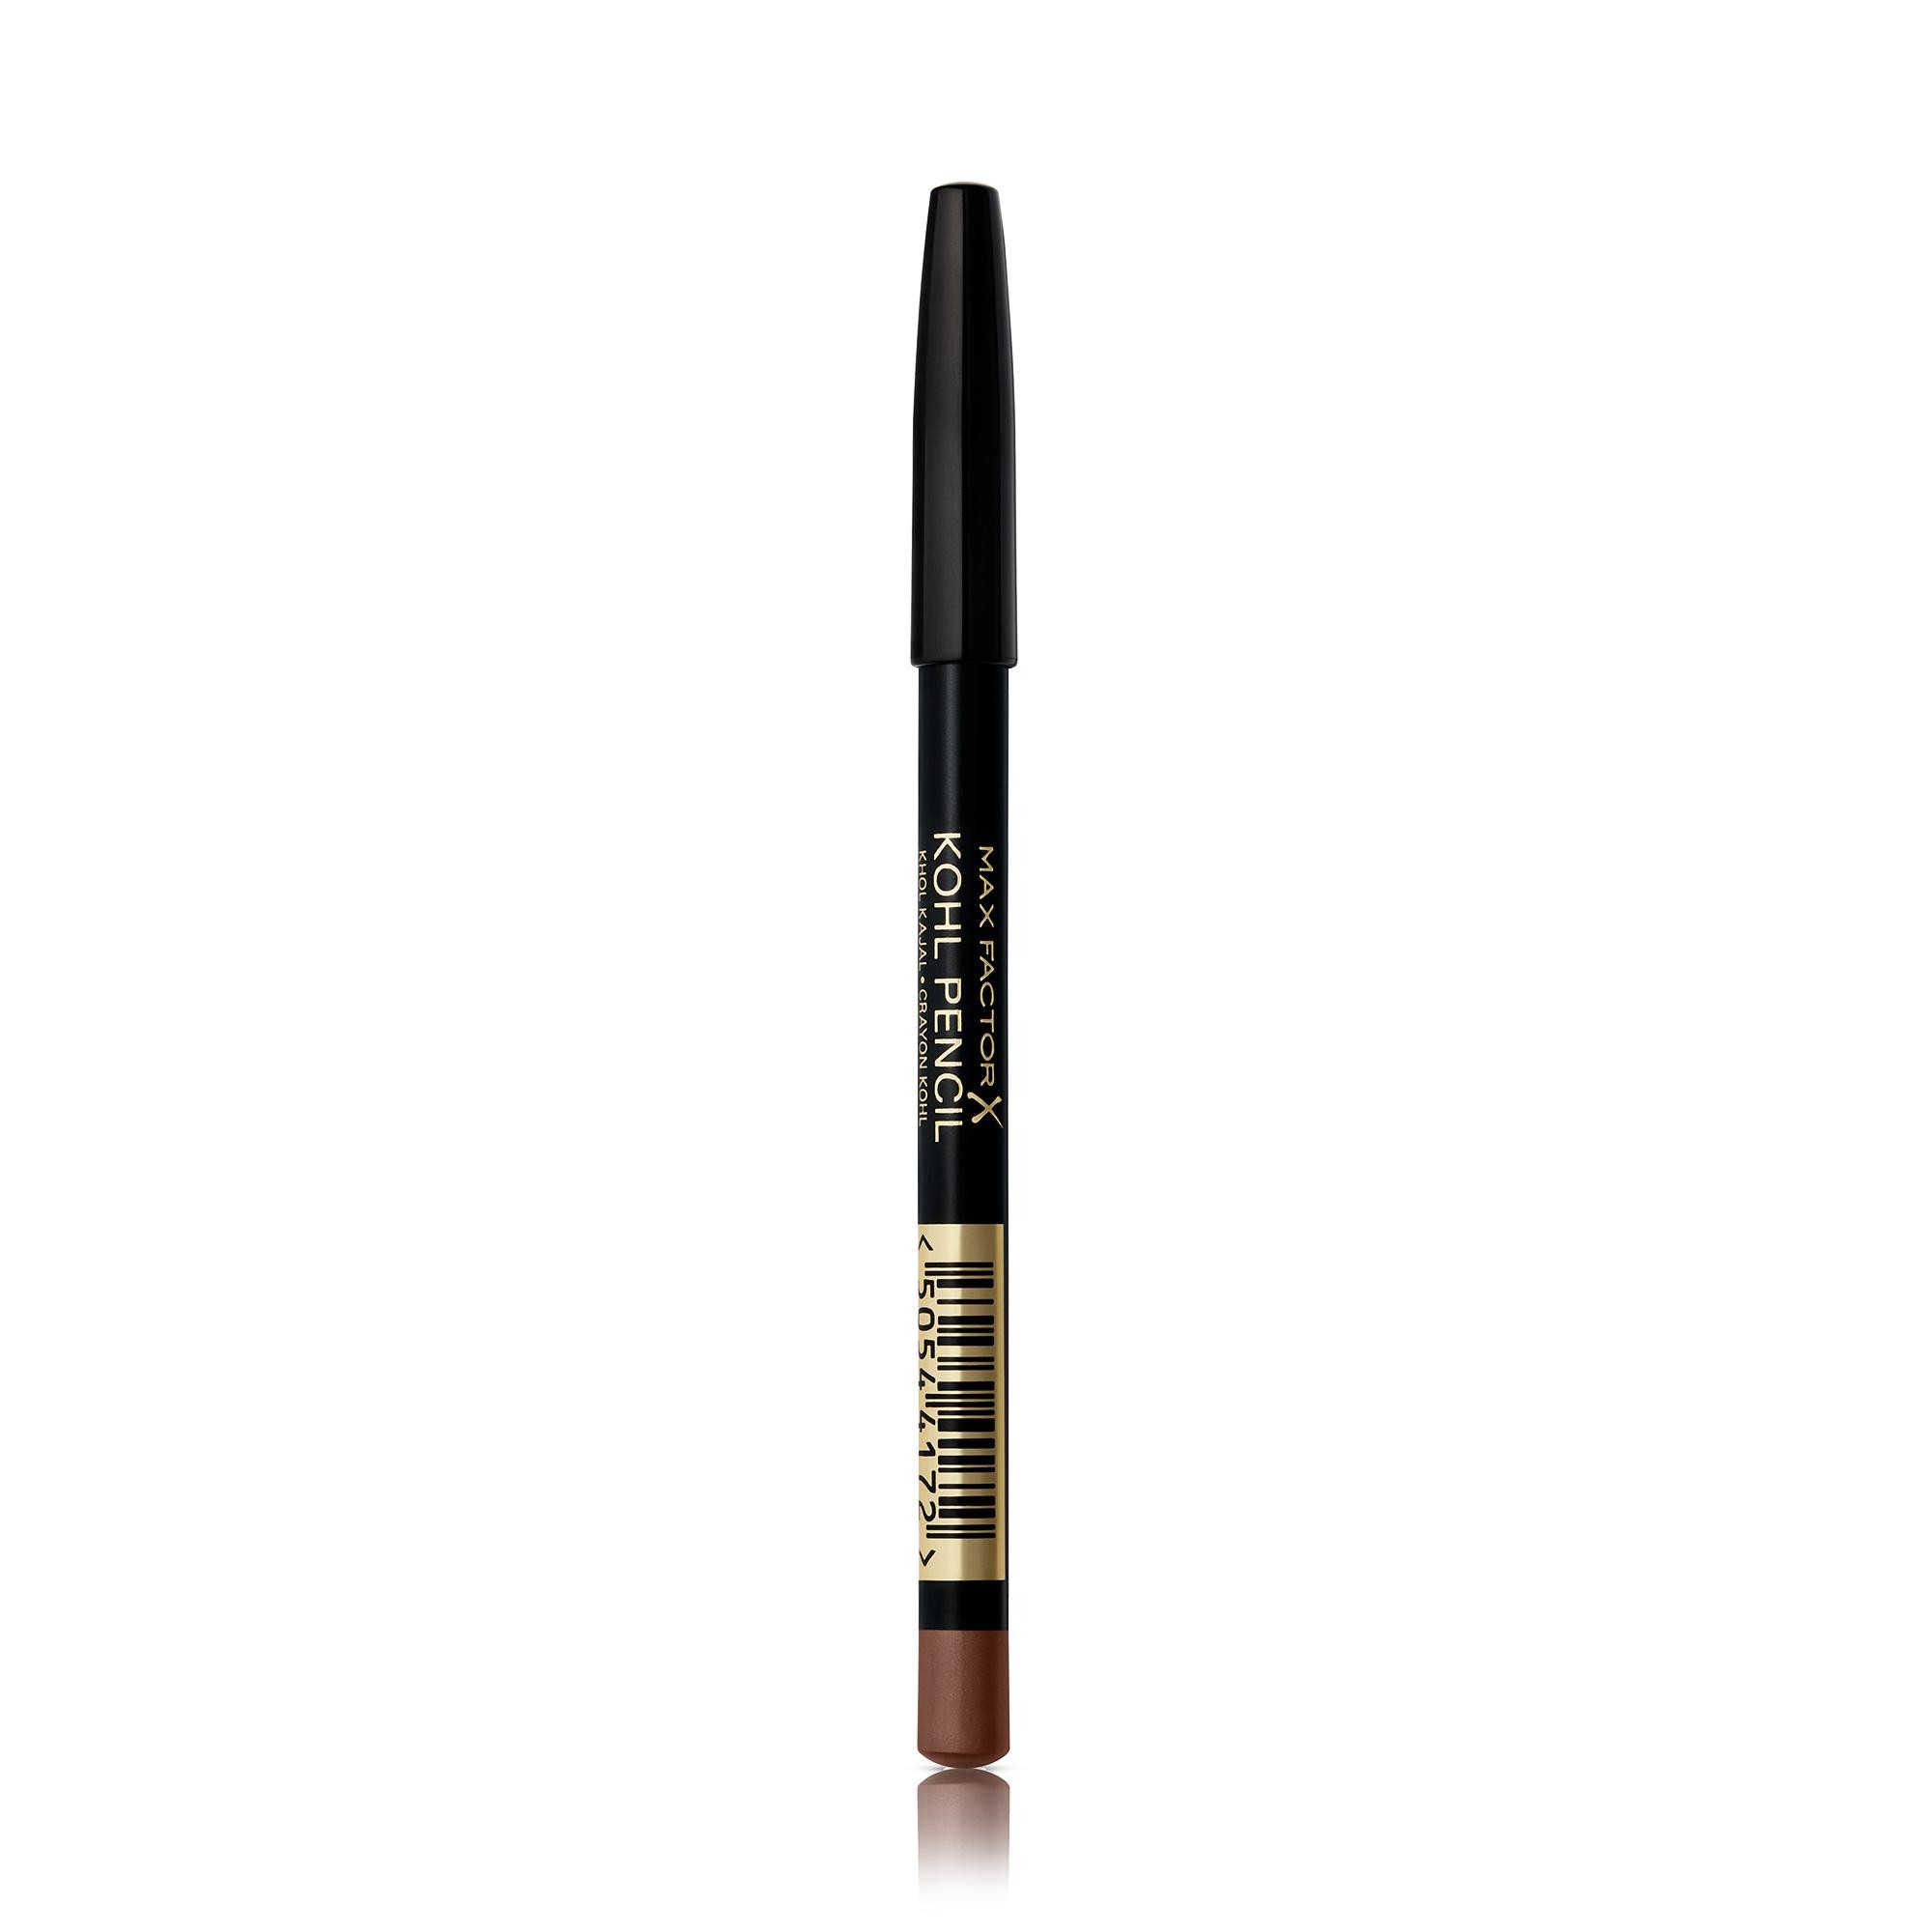 Max Factor Kohl Pencil, 040 Taupe, 1.2g